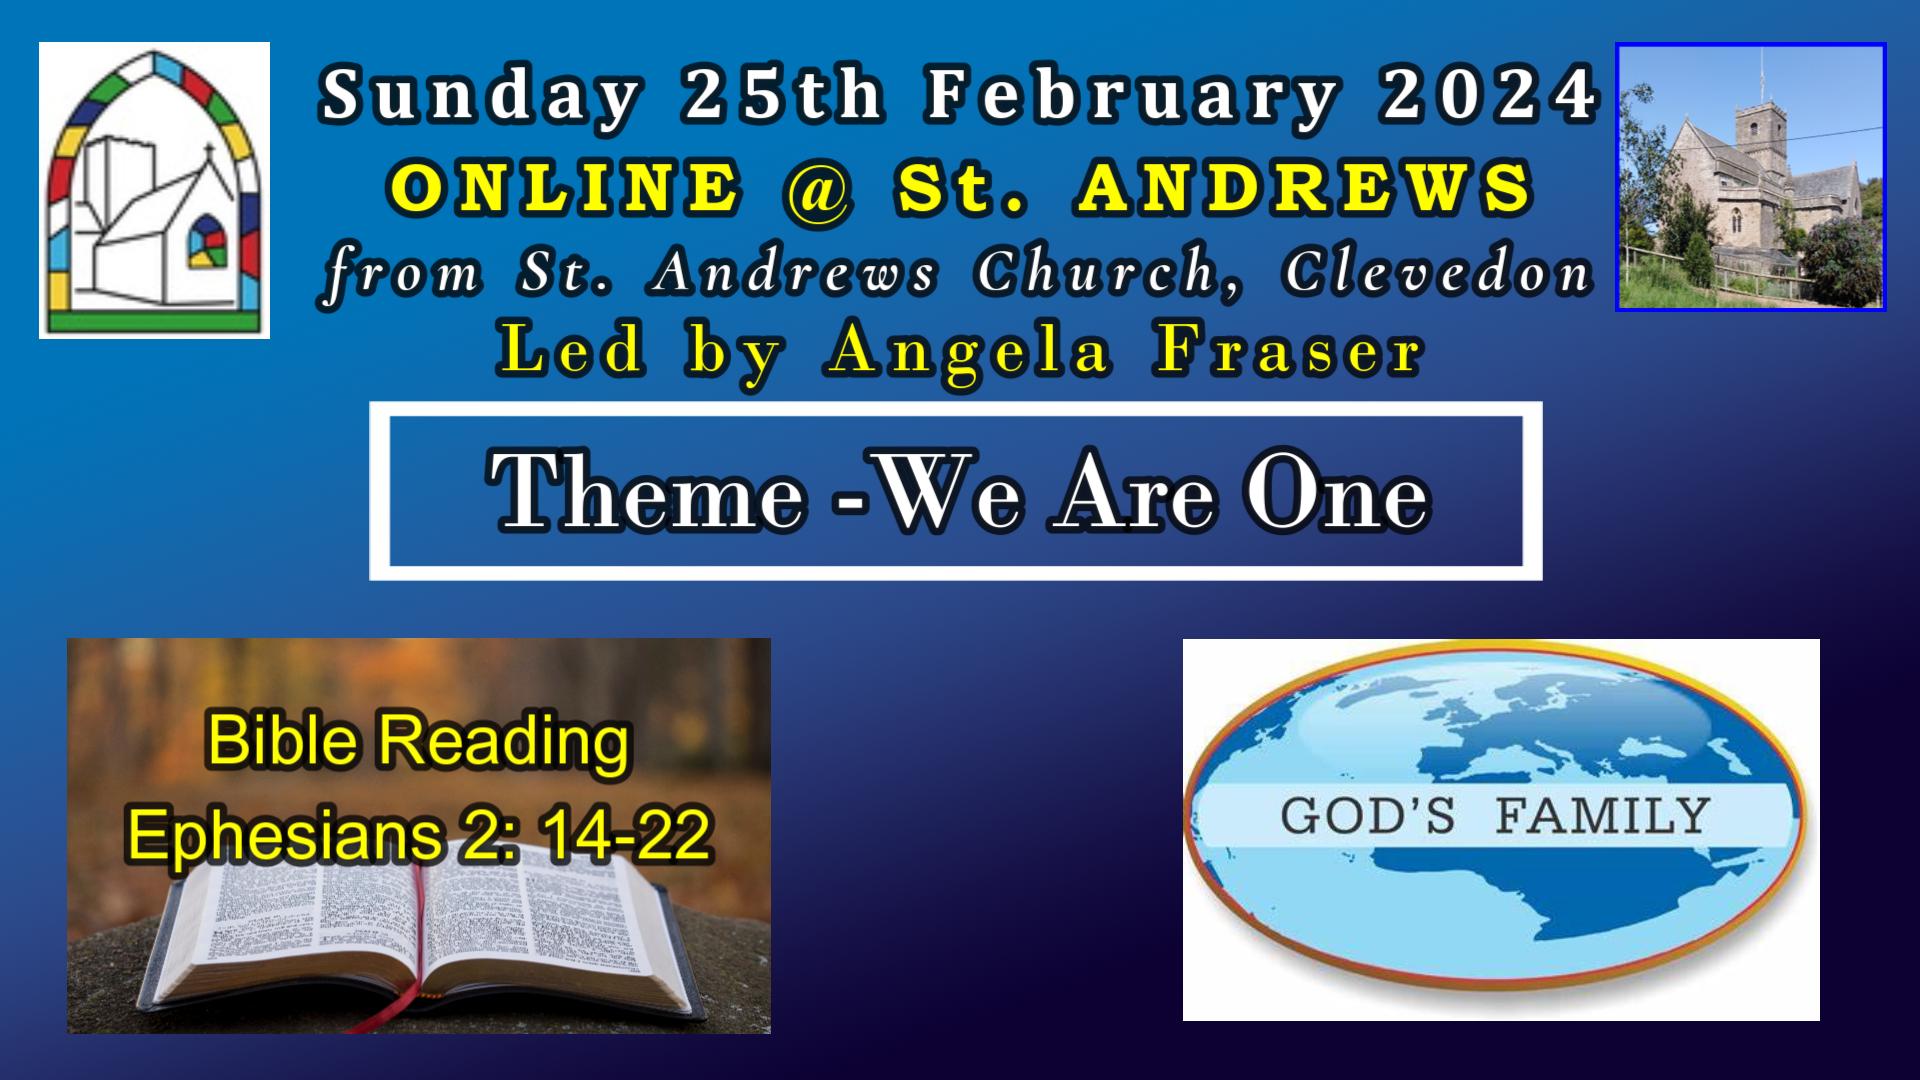 St Andrew's Online: We are One